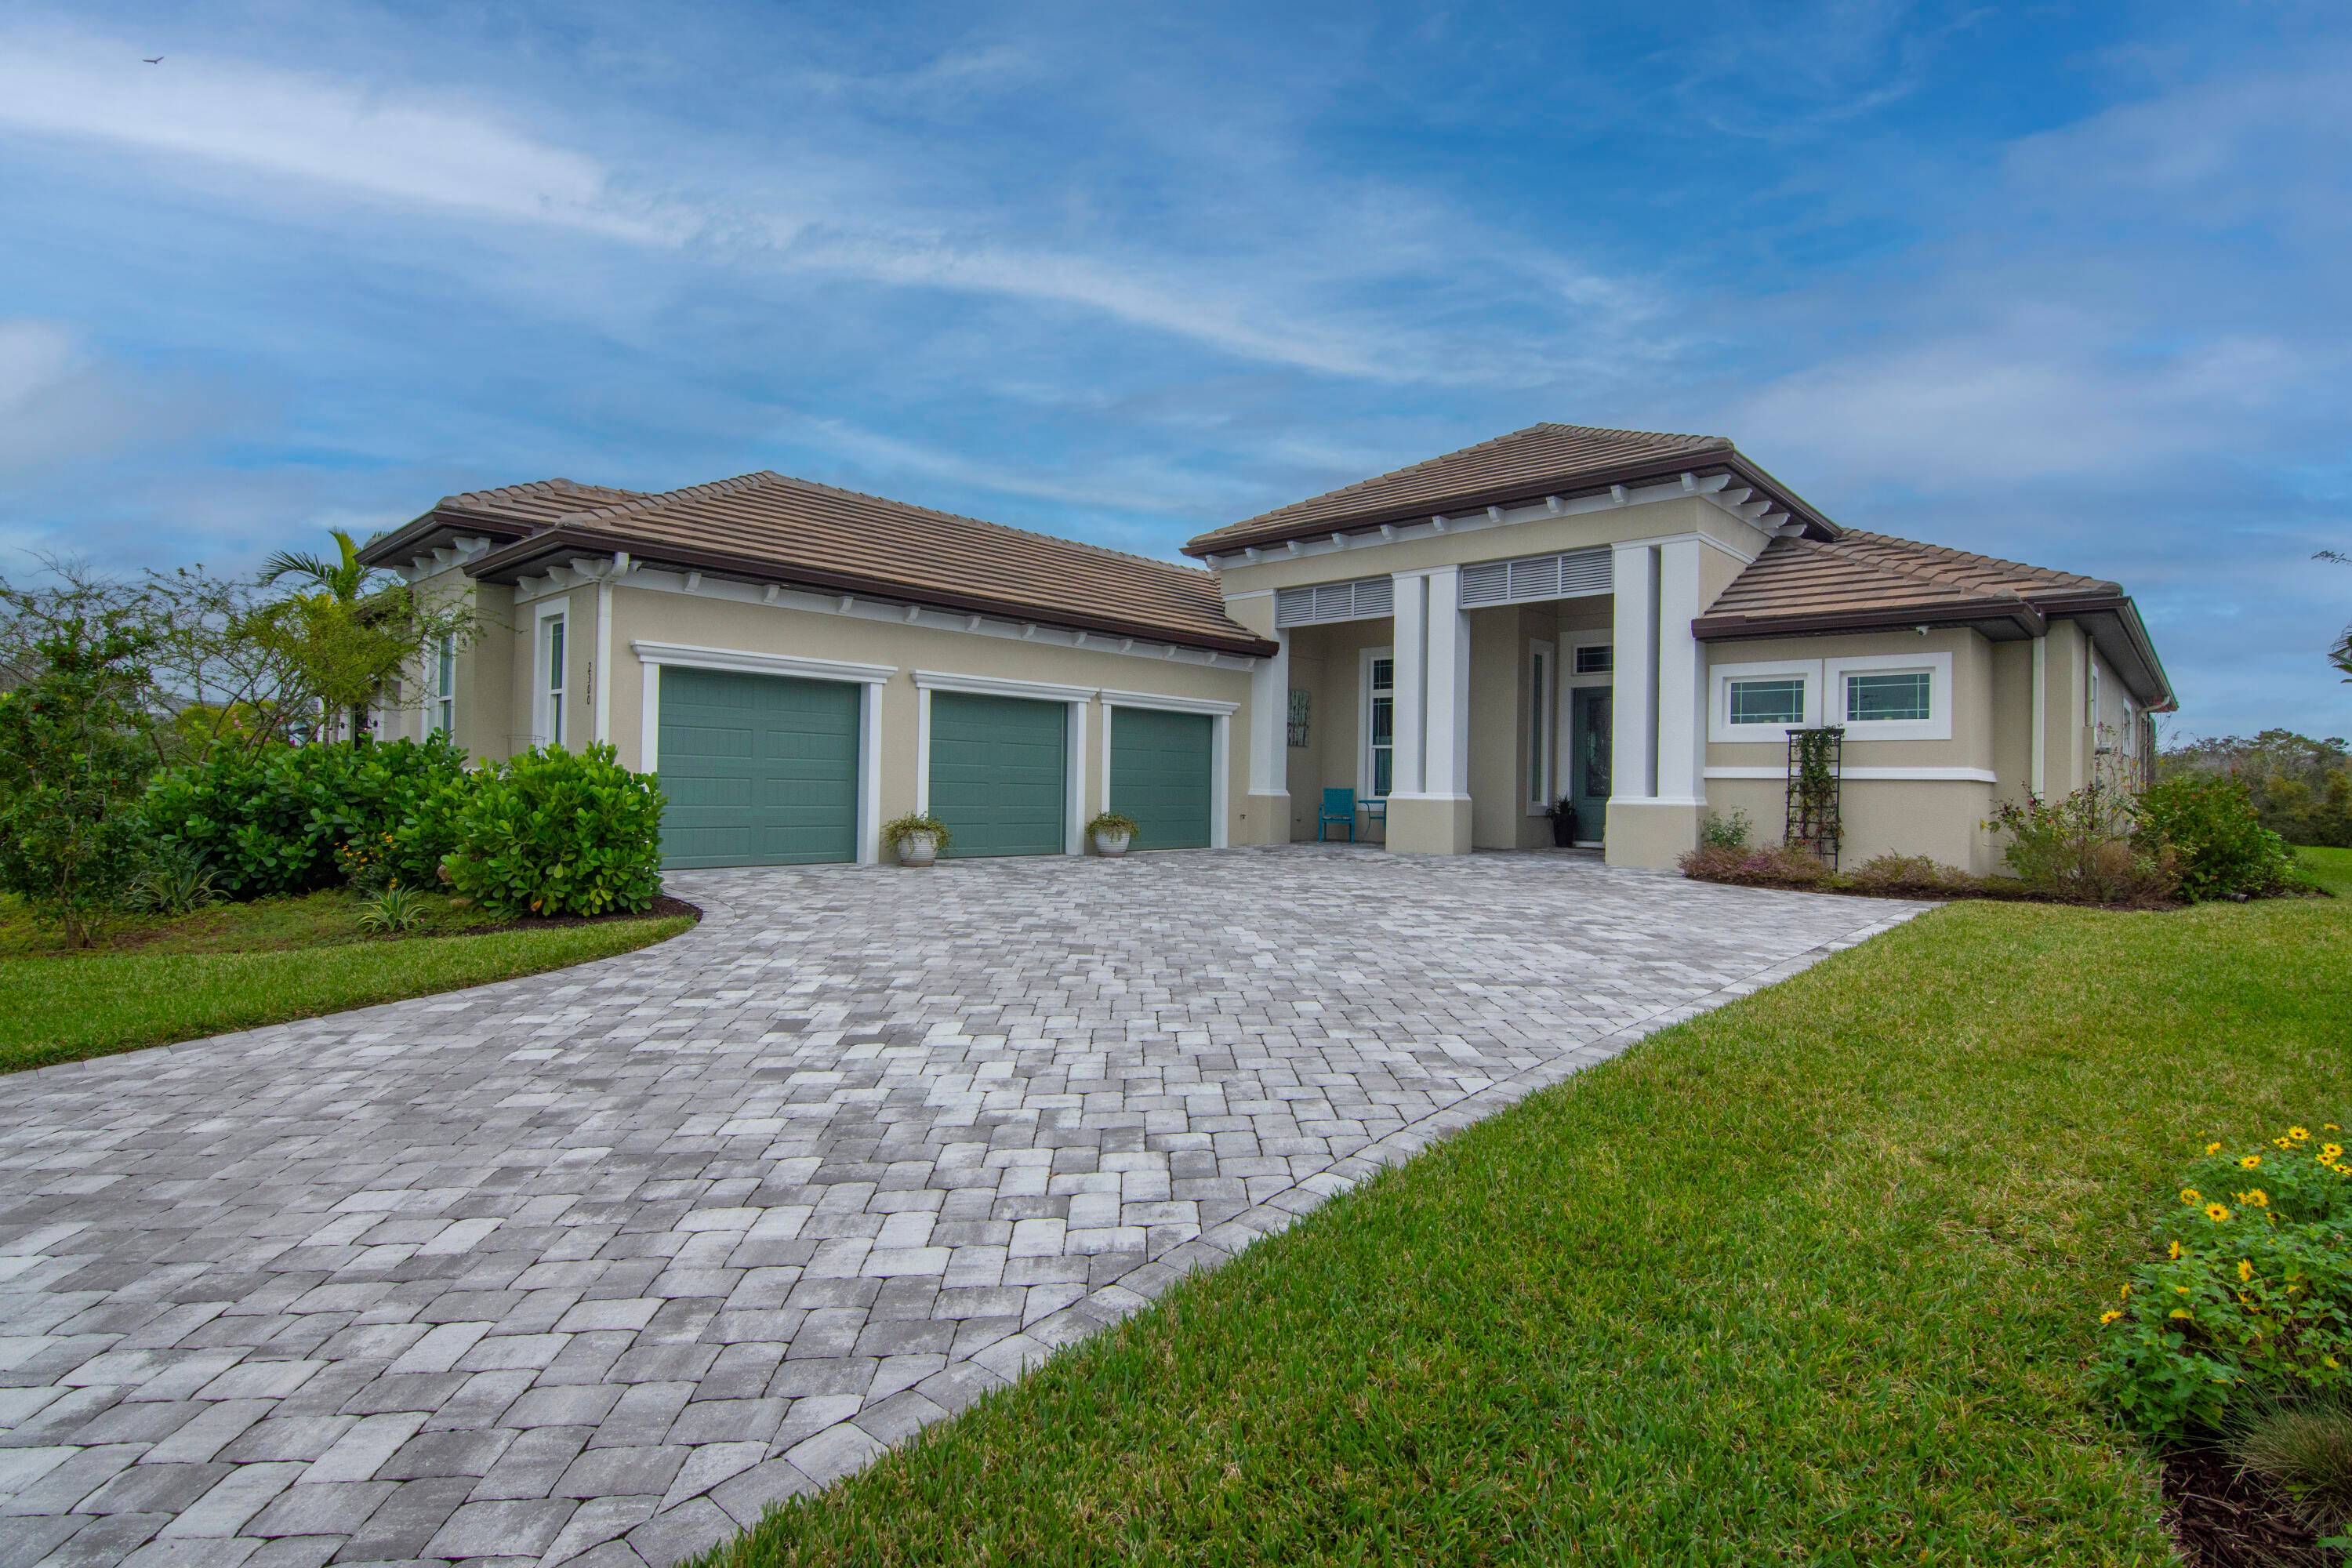 Here is your slice of paradise in the Audubon certified community of Indian River Club !